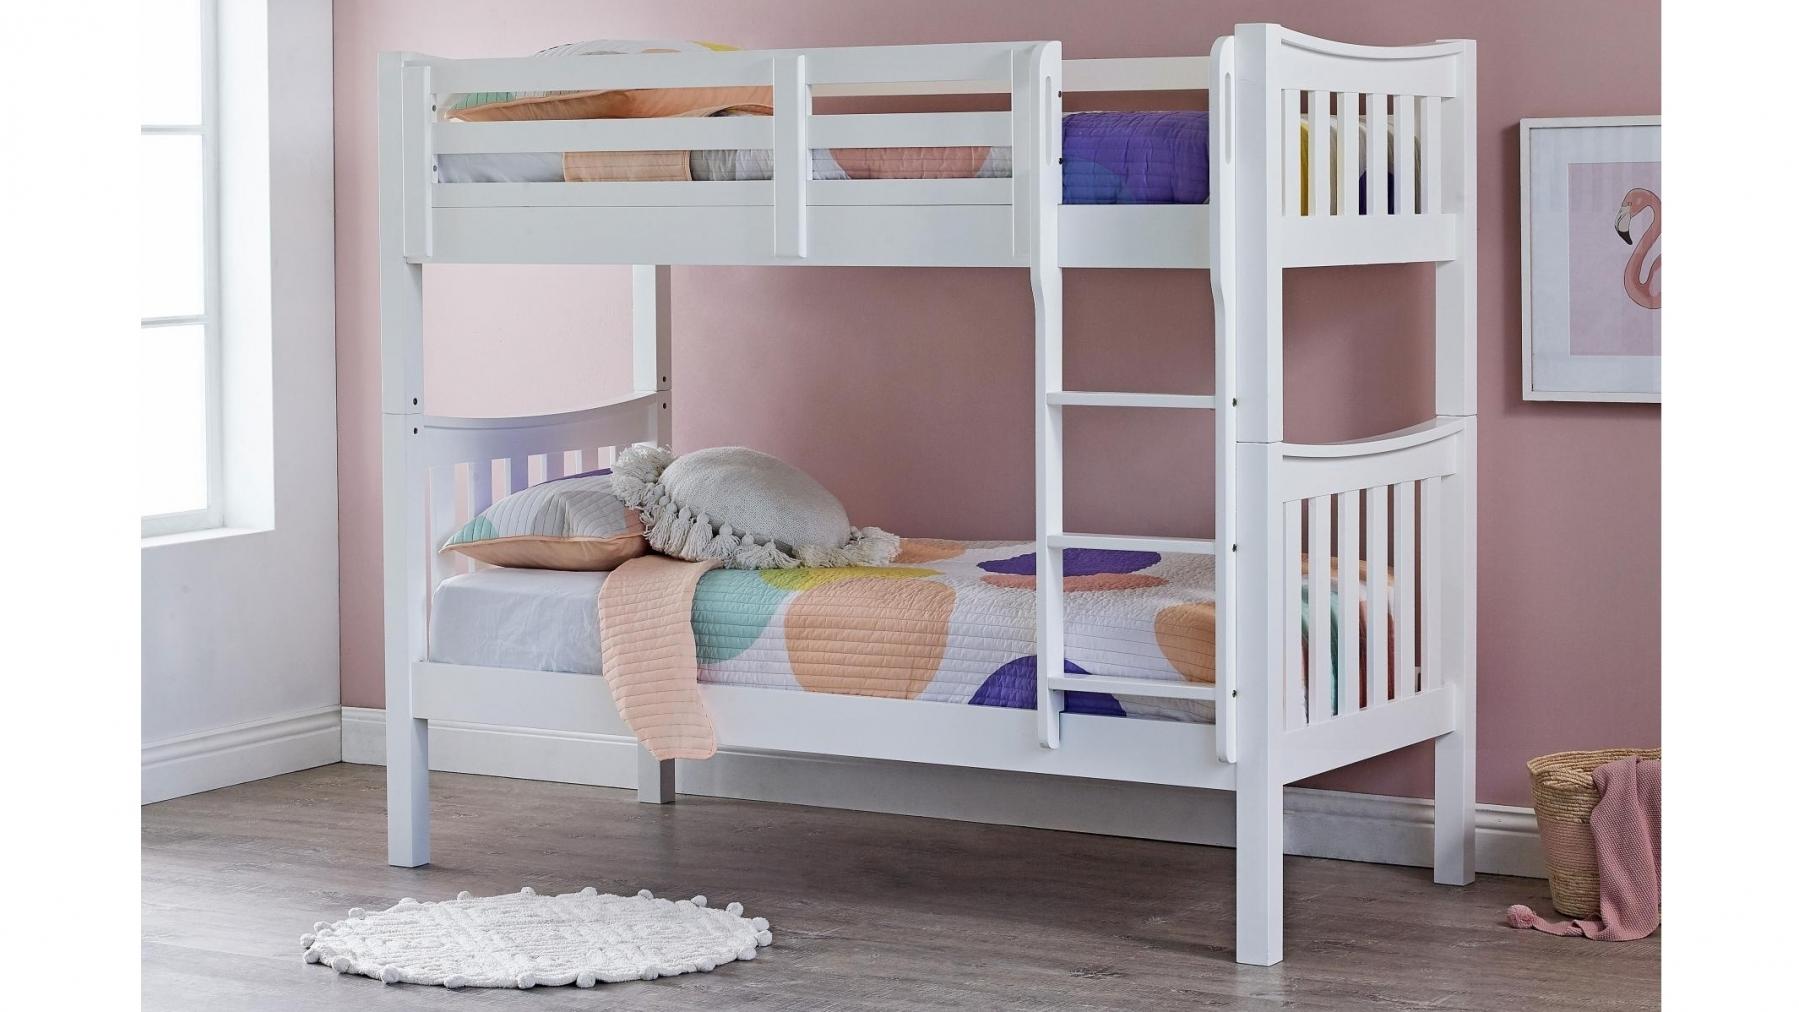 Melody Ii Bunk Bed Harvey Norman Au, Furniture Row Camp Bunk Bed